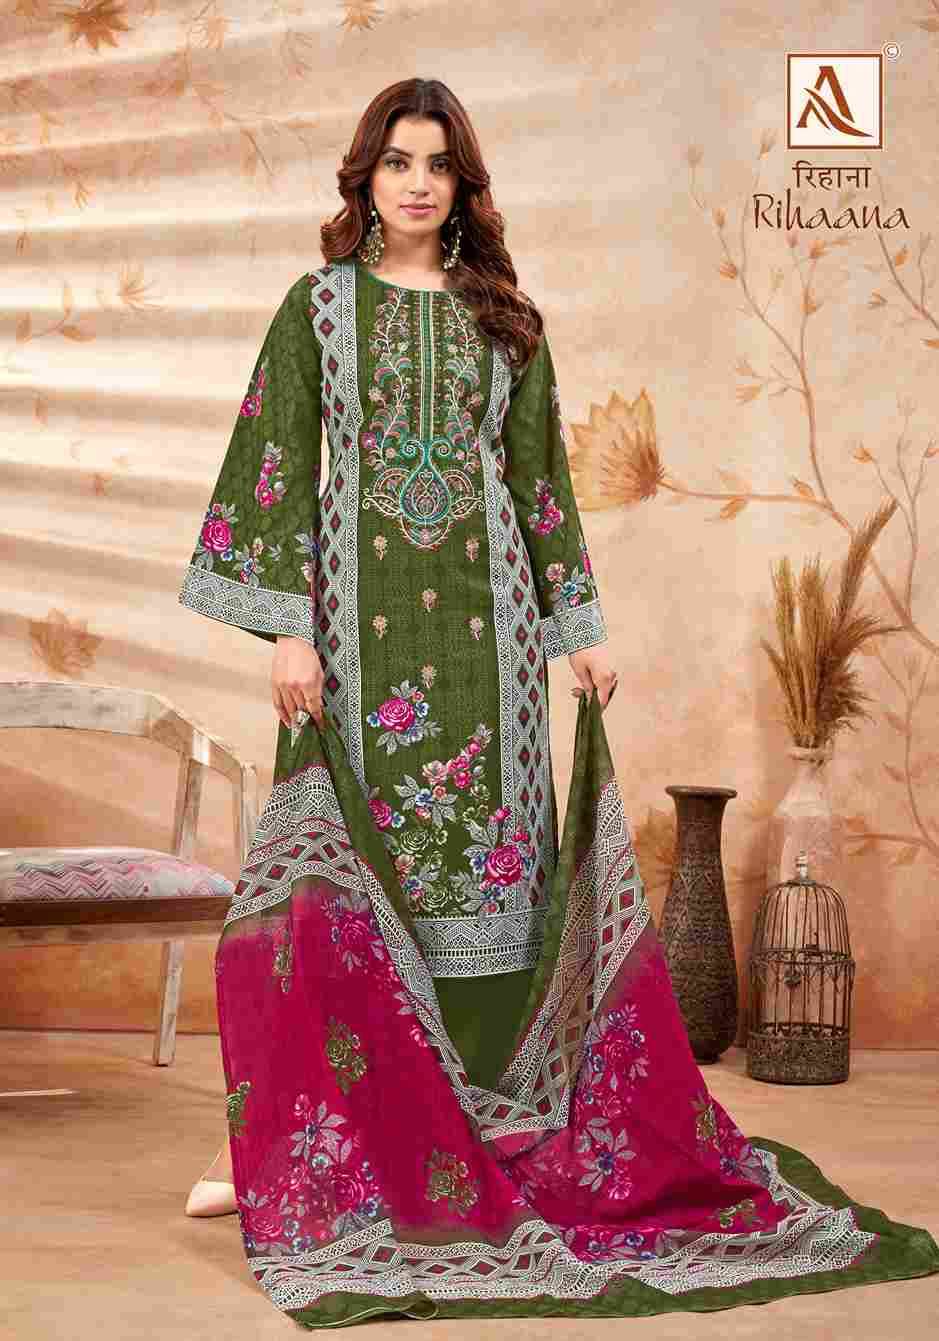 Rihaana By Alok Suit 1533-001 To 1533-008 Series Beautiful Festive Suits Stylish Fancy Colorful Casual Wear & Ethnic Wear Pure Cambric Cotton Print Dresses At Wholesale Price